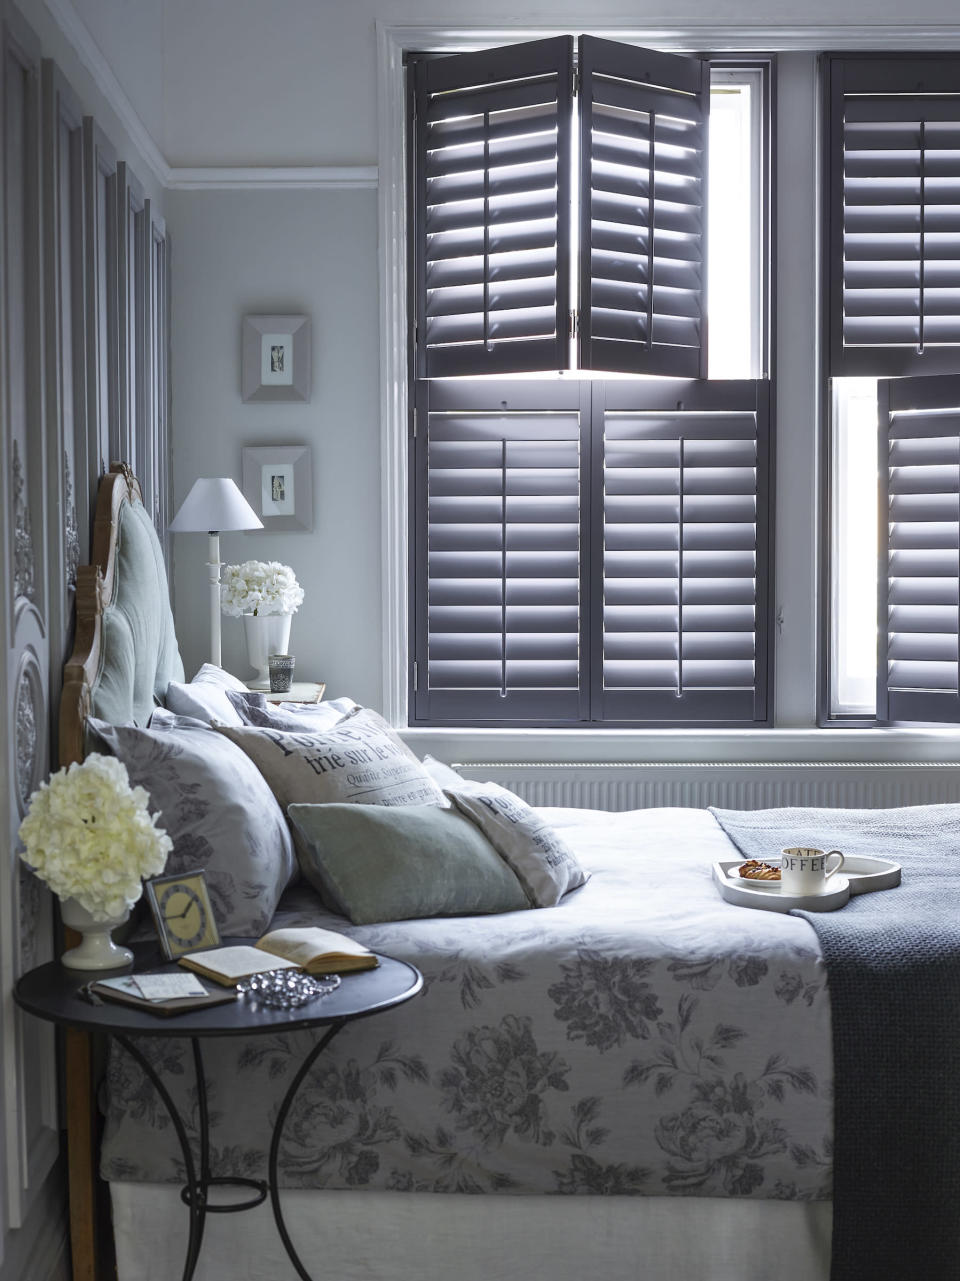 <p> &apos;Installing shutters in your country-style bedroom can add character as well as practical benefits,&apos; says Sam Tamlyn, General Manager at Shutterly Fabulous. &apos;One of the most functional benefits is their ability to insulate the room, acting as a form of double glazing which in turn can help to reduce heating bills. </p> <p> Compared to other window coverings such as curtains or blinds, shutters are an elegant, low-maintenance window solution that only requires a wipe with a damp cloth. </p> <p> Shutters can be fitted to all types of windows, meaning you can cater to any awkwardly shaped windows or doorways commonly seen in older homes. Solid shutters, in particular, can replicate the features of period properties. </p> <p> &apos;If you are looking to achieve total blackout in a bedroom, solid shutters are the ideal choice,&apos; says Sam Tamlyn. &apos;Slatted shutters are the ideal solution for balancing light and privacy in rooms where comfort and wellbeing are a must.&apos; </p>